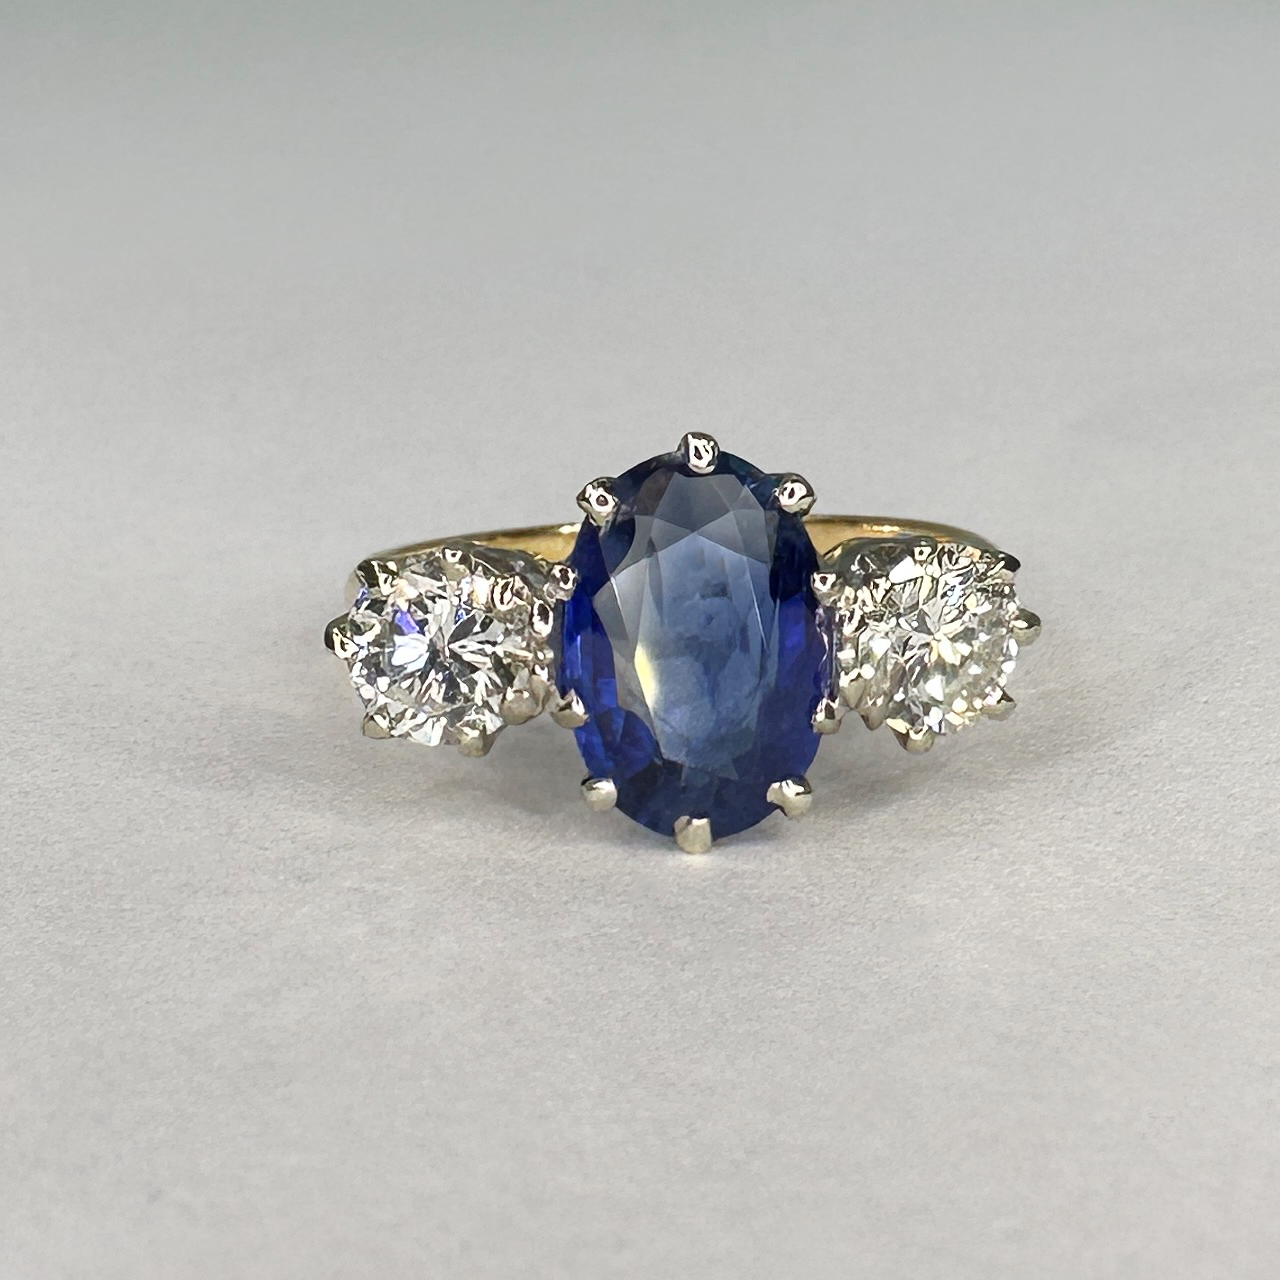 Exquisite Ceylon Blue Sapphire Ring. The central oval sapphire is a typical mid to light blue. The 1.8 ct weight sapphire has a few natural inclusions and is nestled between two sparkling, bright 0.5ct brilliant cut diamonds, total weight of diamonds 1 ct.The ring is claw set in 18ct white gold, the shank is in 18ct yellow gold. Please contact us for more information, photos or a video.This stunning ring can be resized.